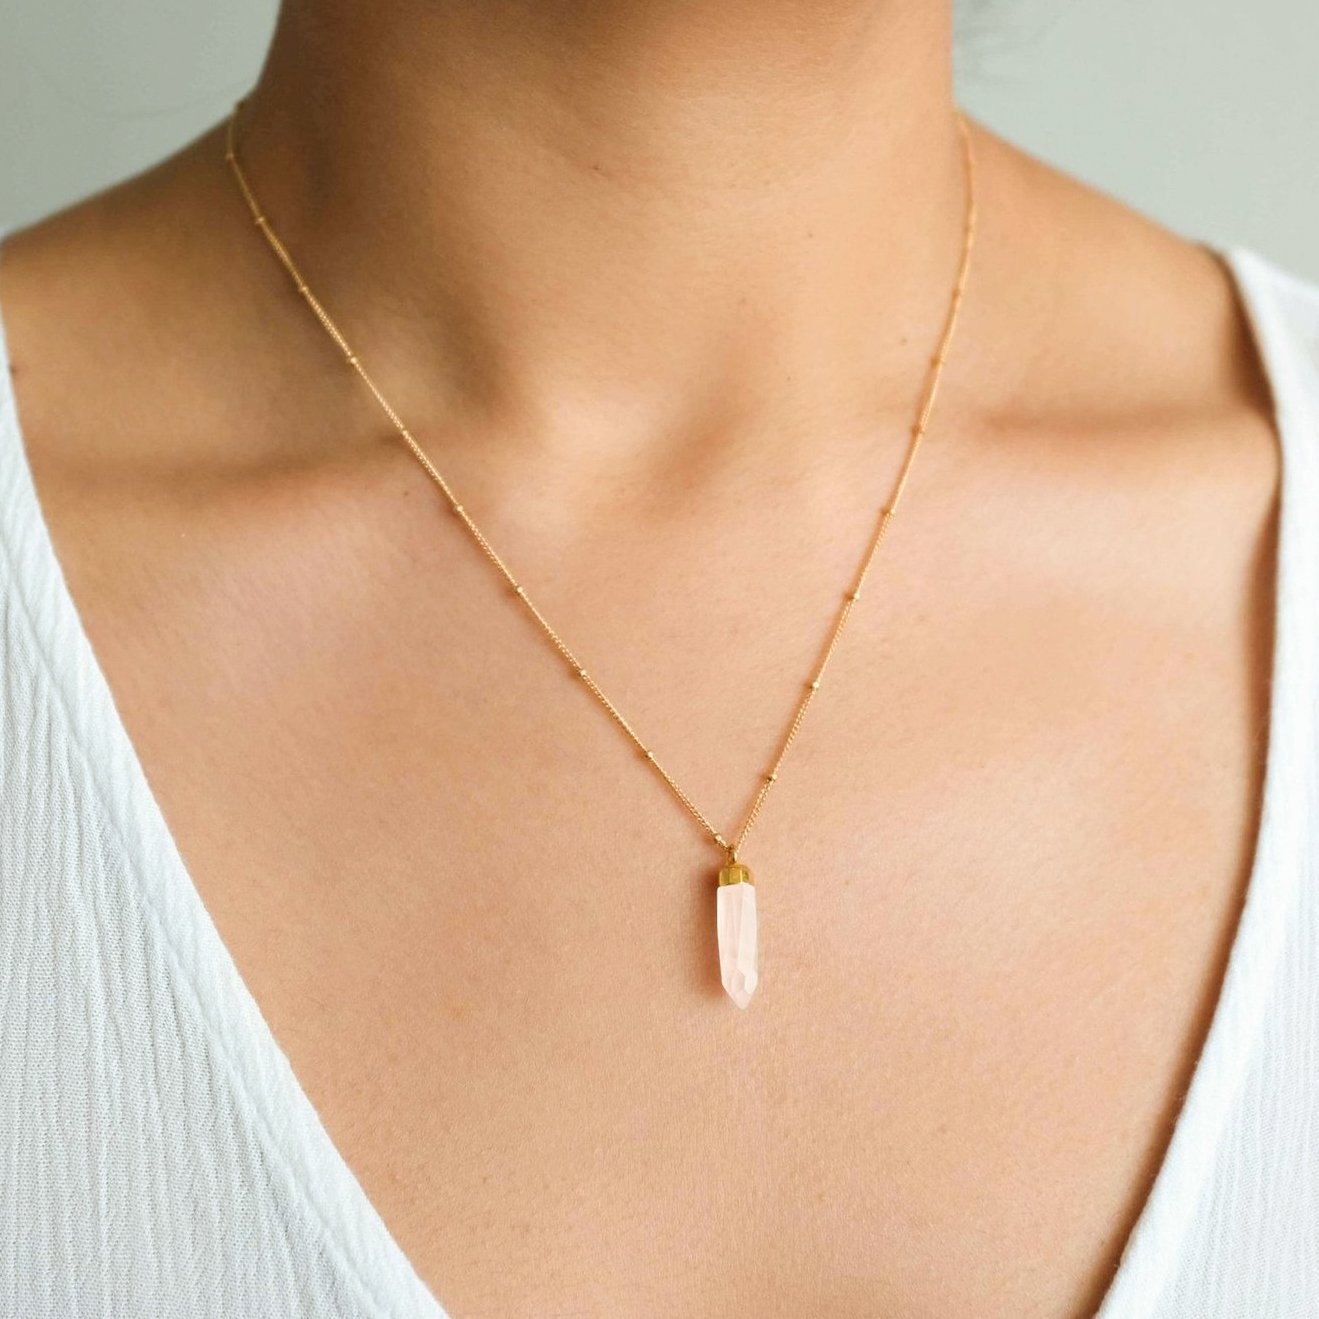 Rose Quartz Spike Necklace by Simple & Dainty Jewelry